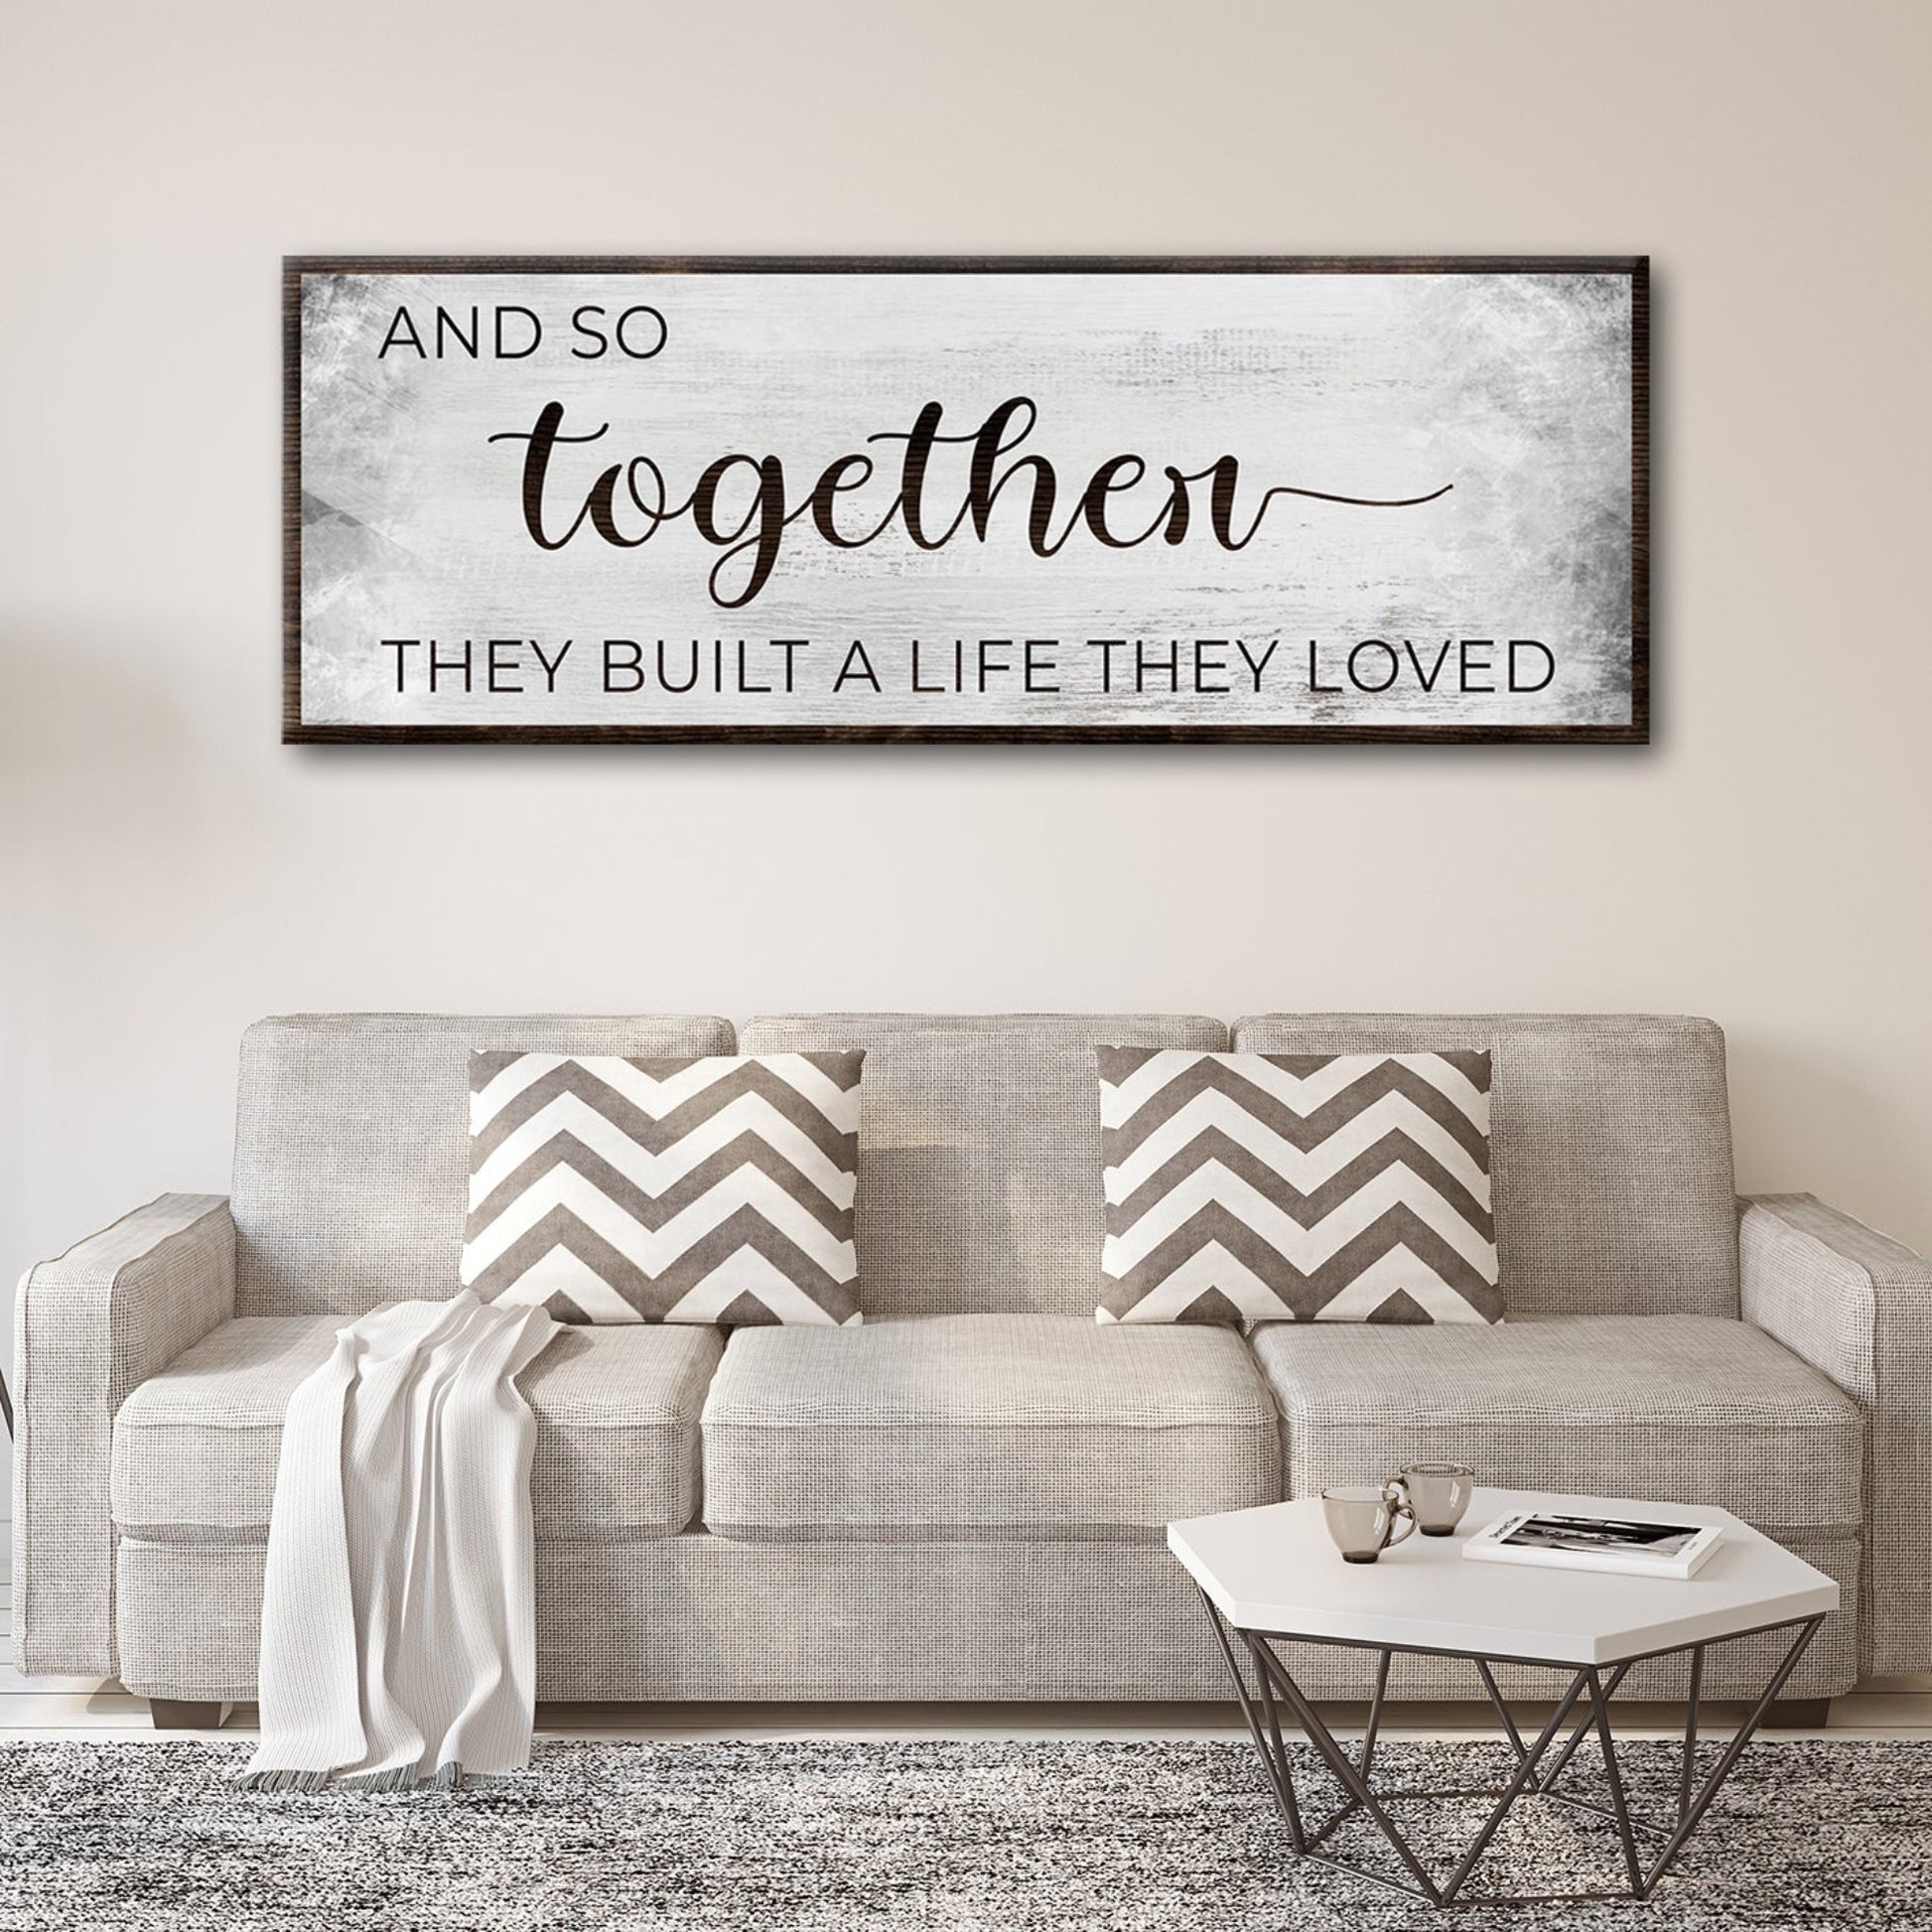 And so together they built a life they loved Sign III - Image by Tailored Canvases